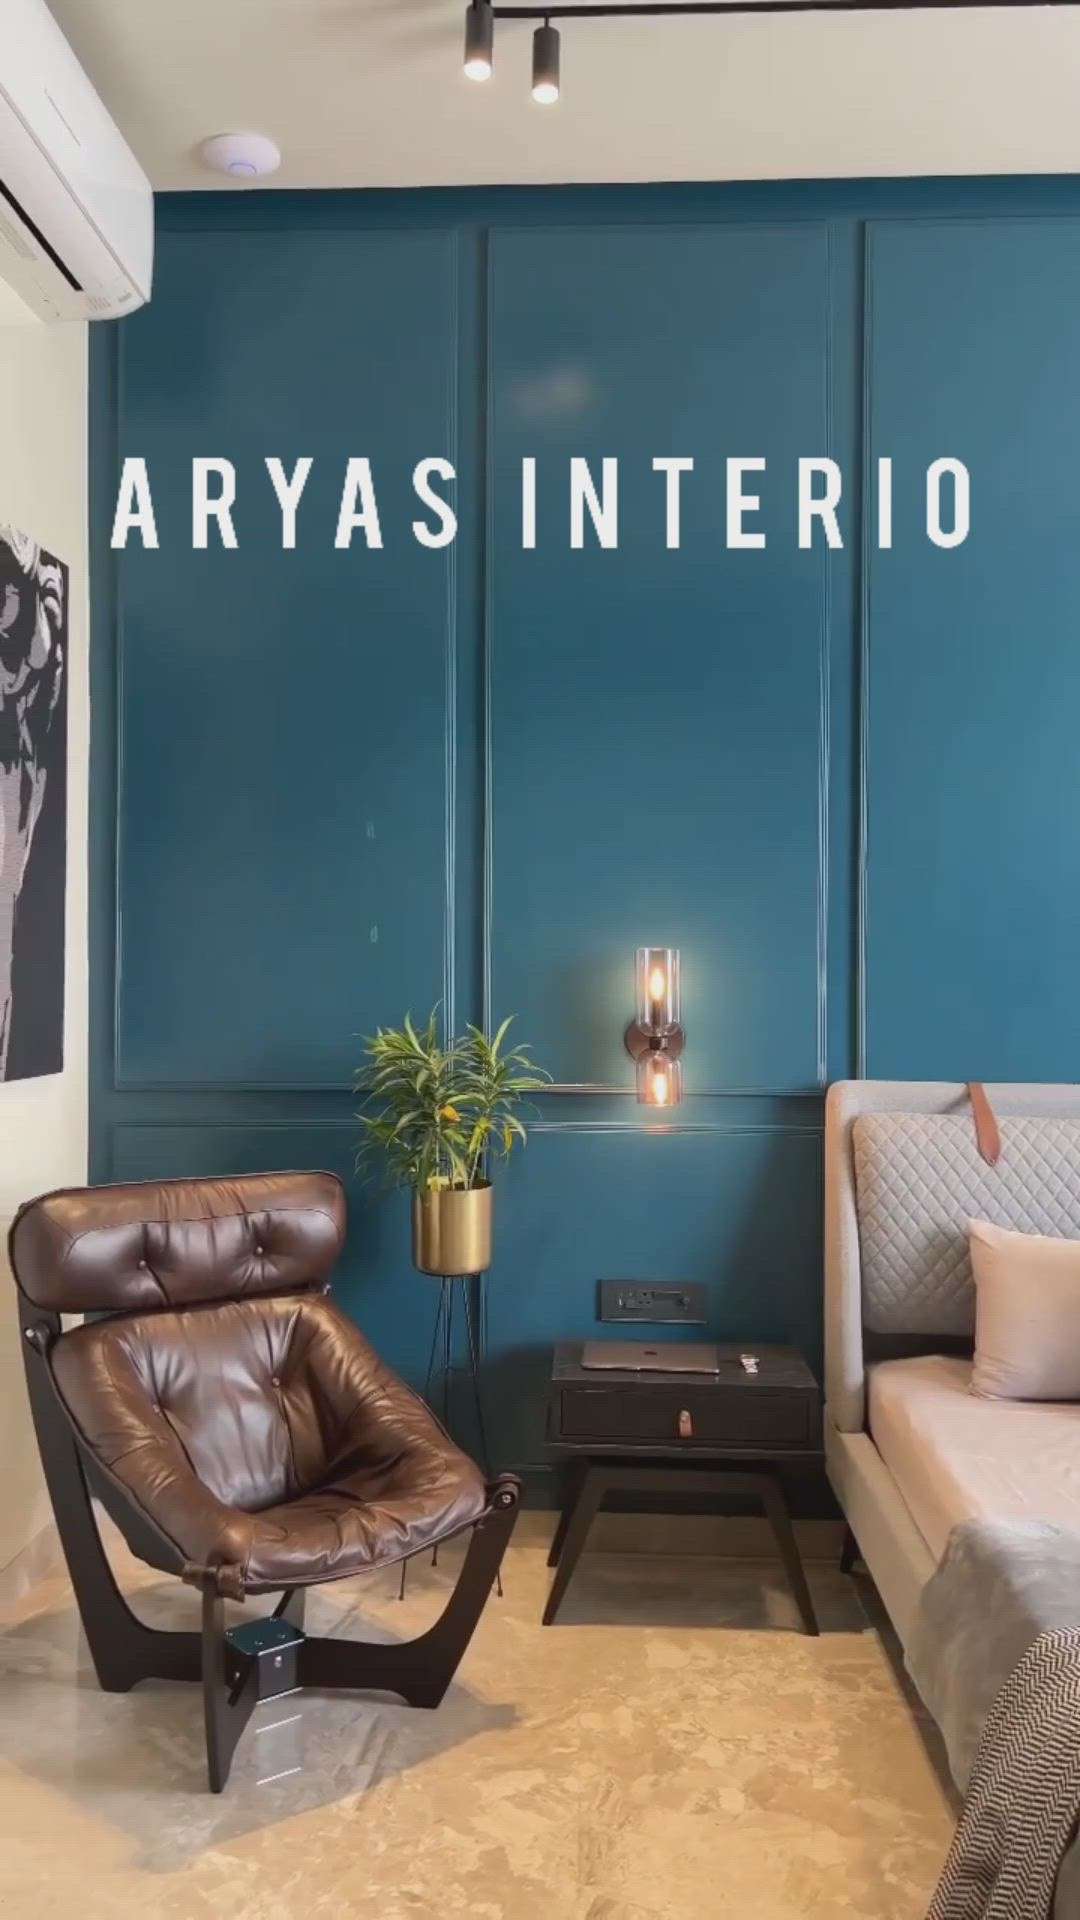 Design Interios by Aryas interio & Infra Group,
Provide complete end to end Professional Construction & interior Services in Delhi Ncr, Gurugram, Ghaziabad, Noida, Greater Noida, Faridabad, chandigarh, Manali and Shimla. Contact us right now for any interior or renovation work, call us @ +91-7018188569 &
Visit our website at www.designinterios.com
Follow us on Instagram #aryasinterio and Facebook @aryasinterio .
#uttarpradesh #Delhihome #delhi #himachal 
#noidainterior #noida #delhincr  #noidaconstruction #interiordesign #interior #interiors #interiordesigner #interiordecor #interiorstyling #delhiinteriors #greaternoida #faridabad #ghaziabadinterior #ghaziabad  #chandigarh